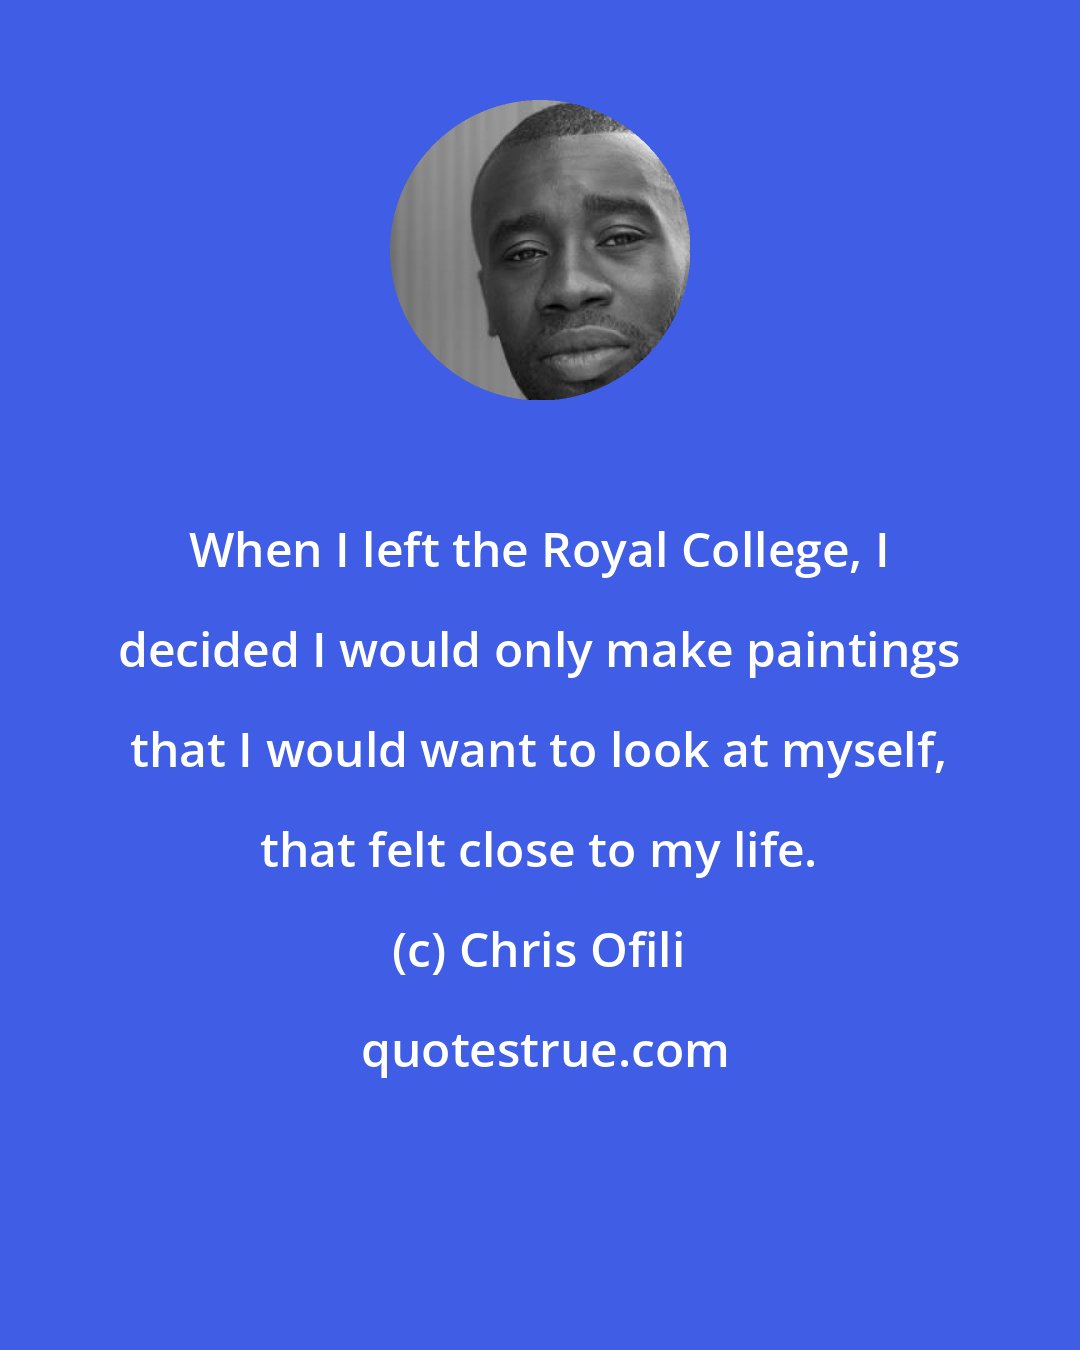 Chris Ofili: When I left the Royal College, I decided I would only make paintings that I would want to look at myself, that felt close to my life.